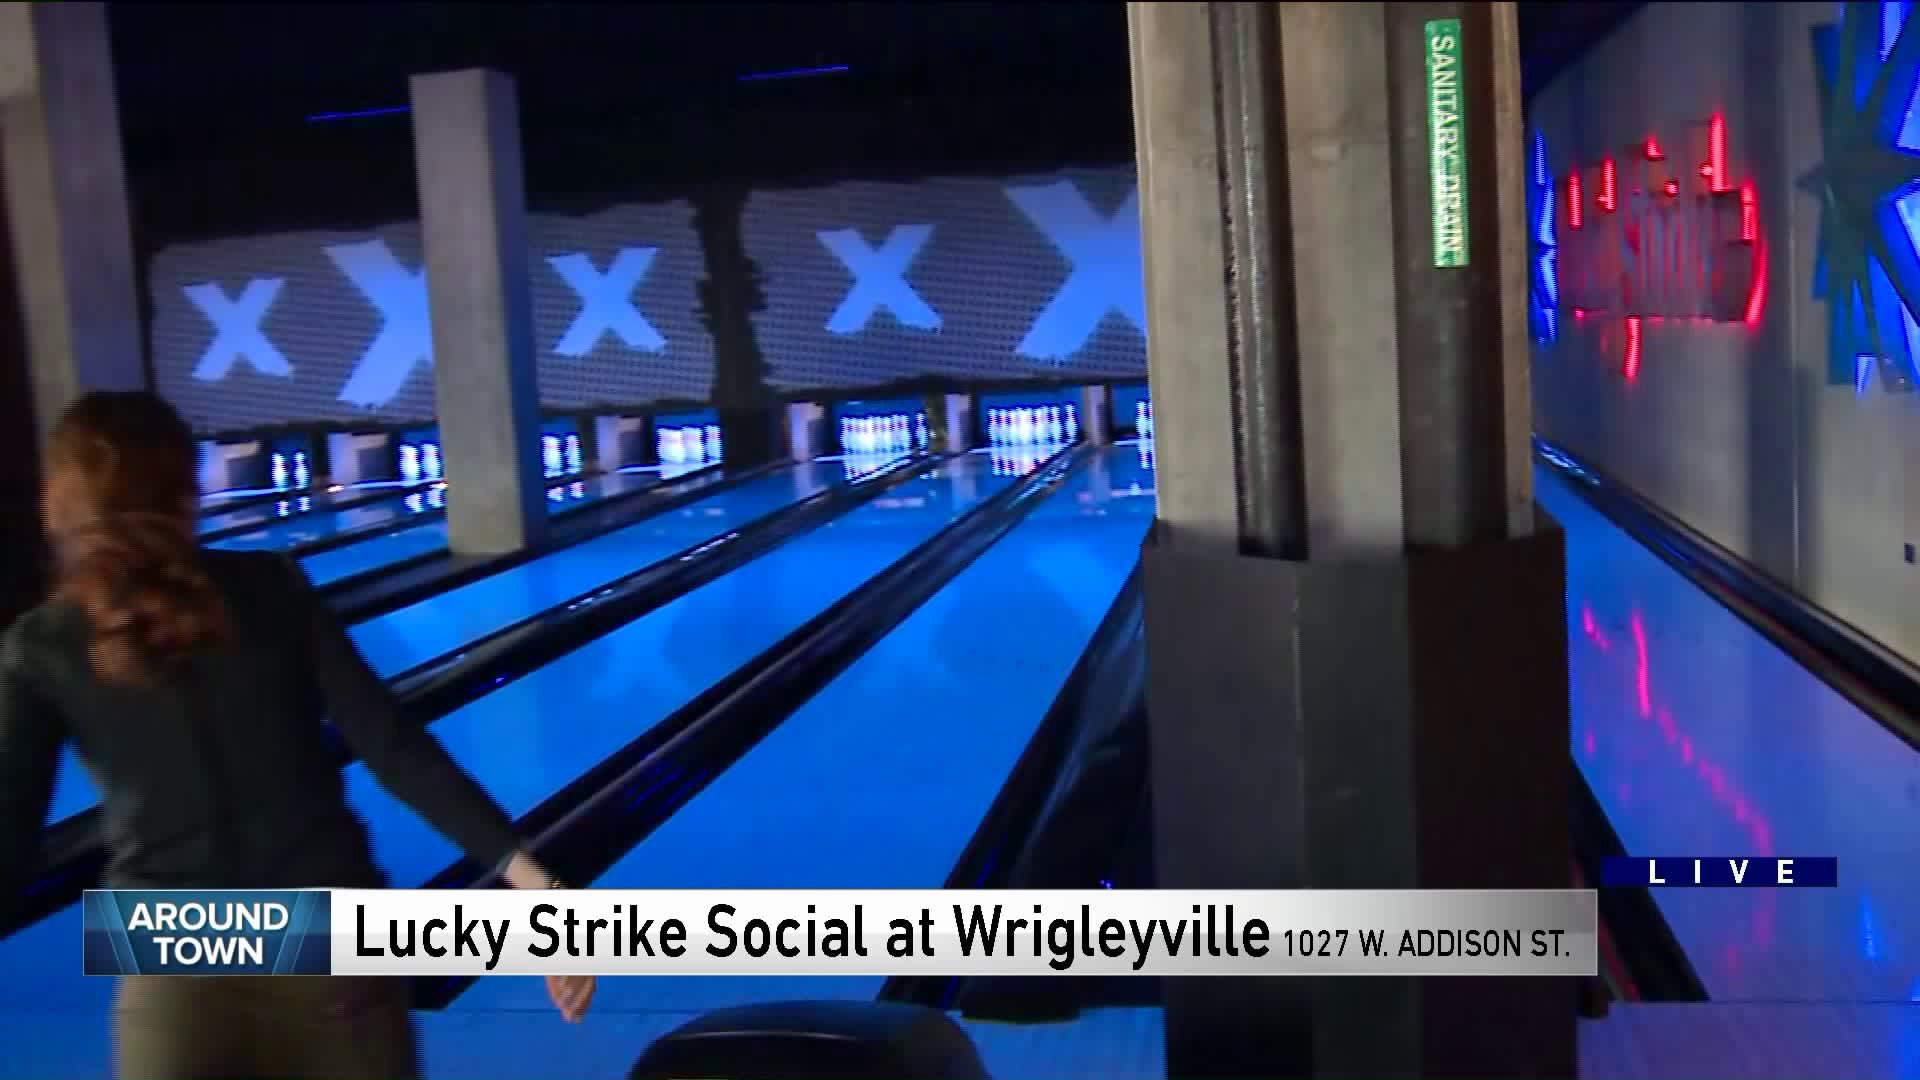 Around Town checks out Lucky Strike Social at Wrigleyville